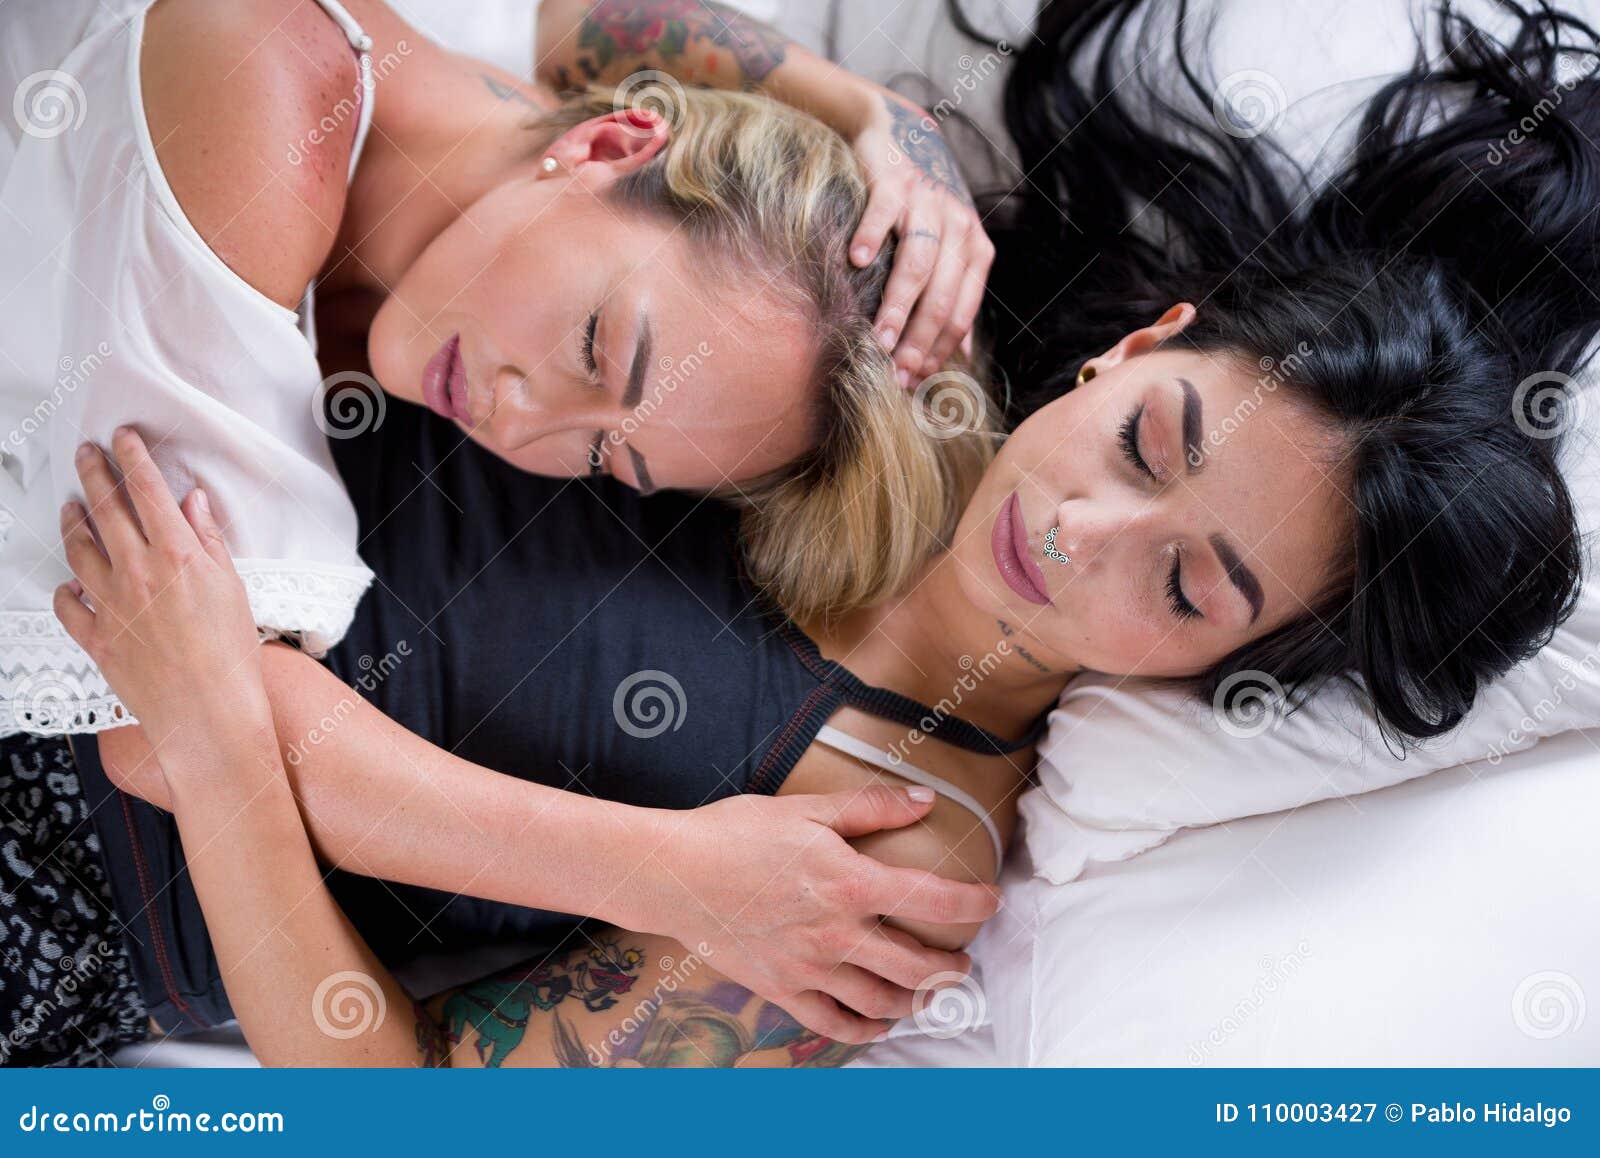 aaron reuther recommends black lesbians on bed pic